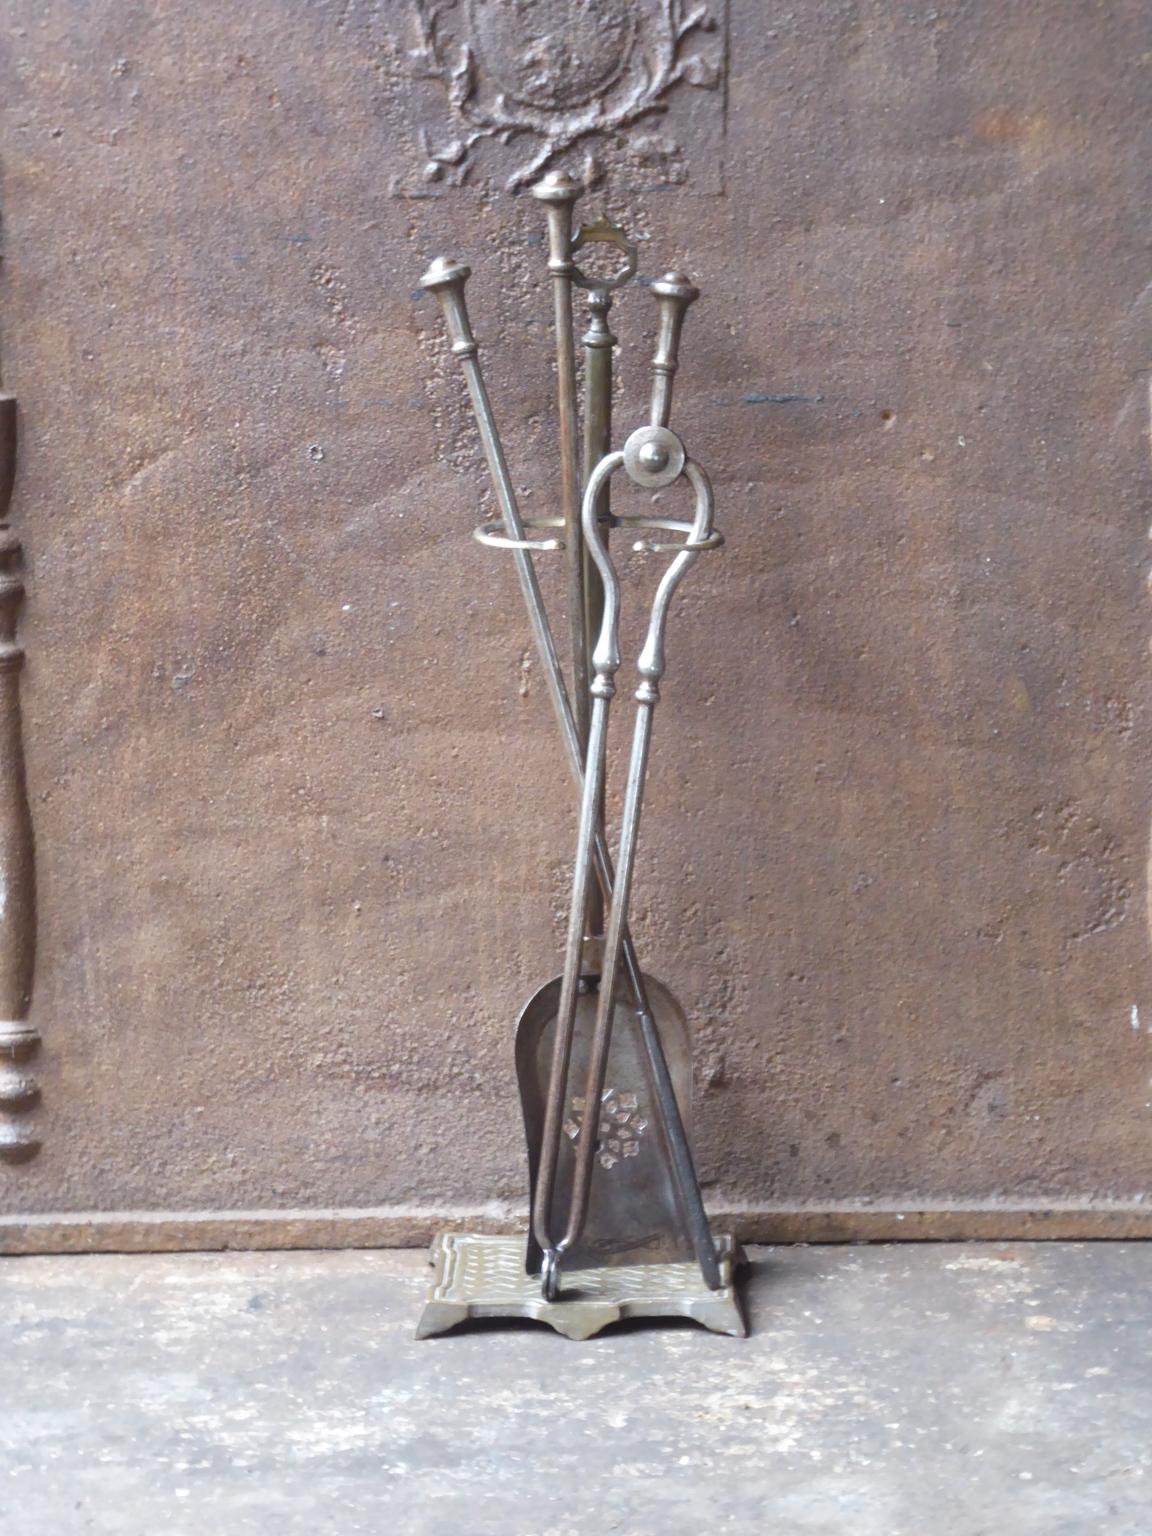 19th century English Victorian fireplace toolset made of wrought iron and brass. The toolset consists of three fire irons and a stand. The condition is good.













 